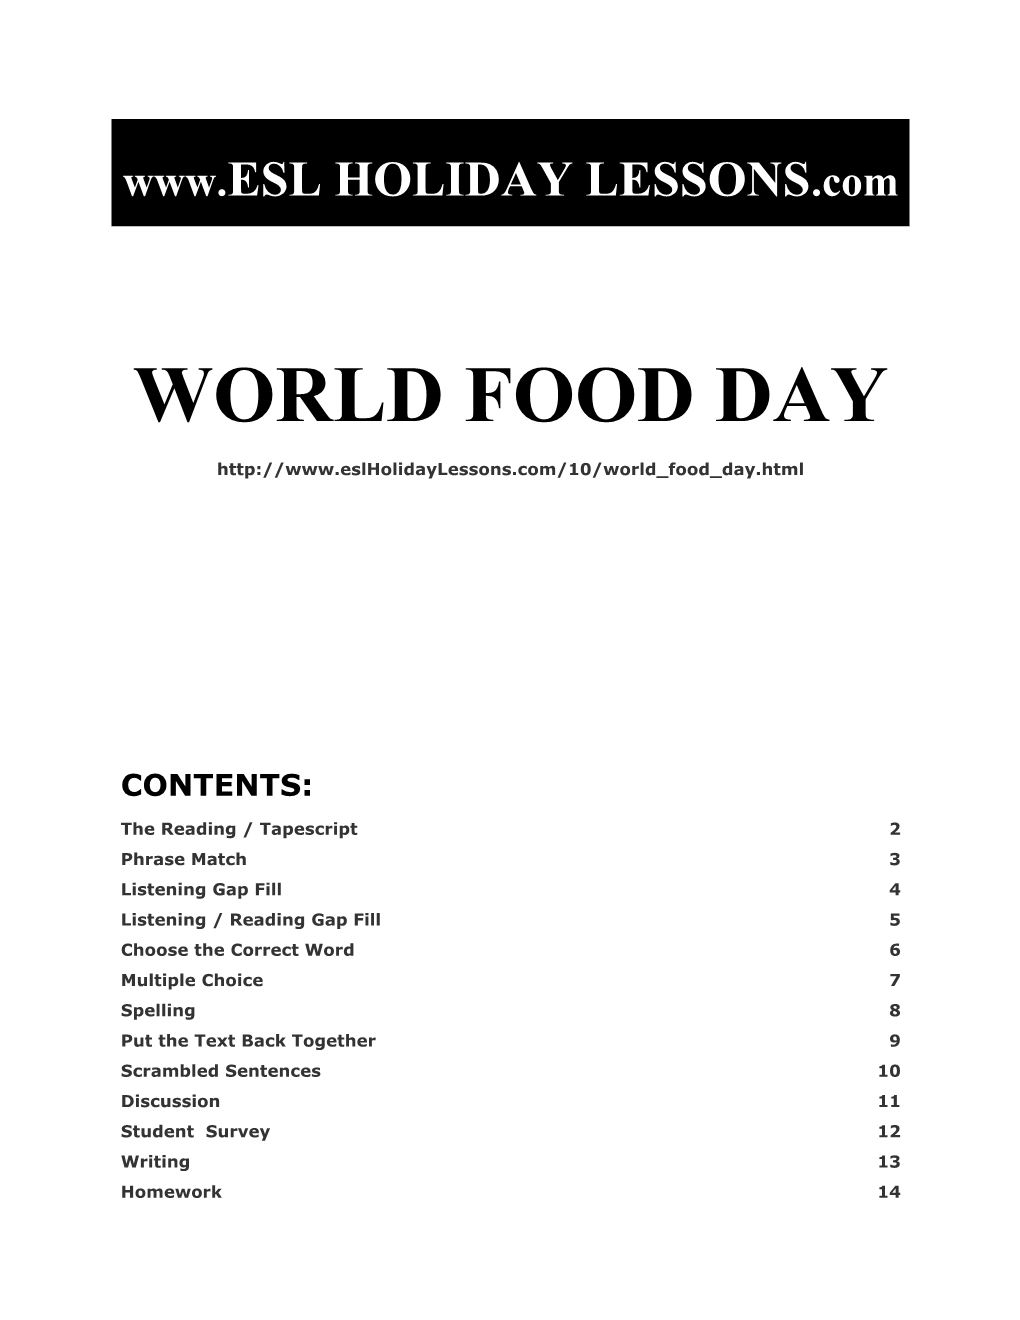 Holiday Lessons - World Food Day